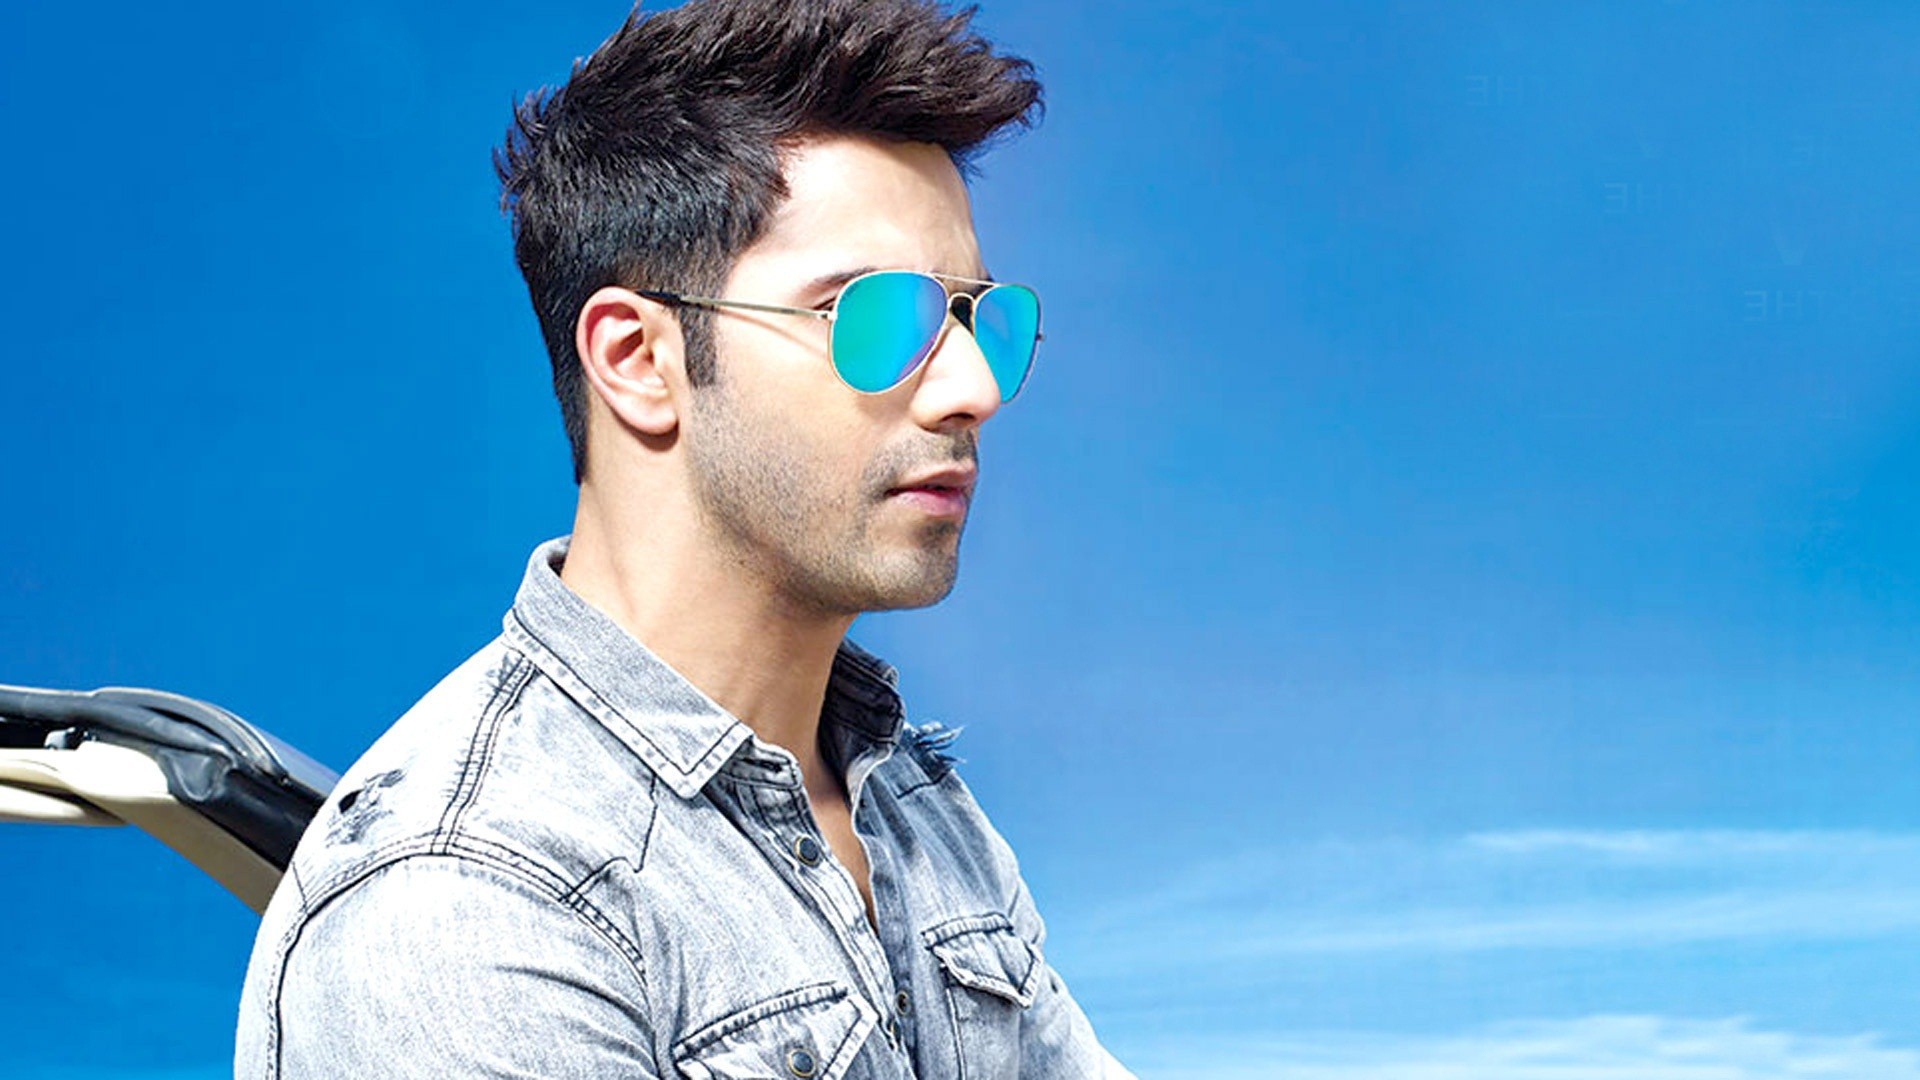 Varun Dhawan Wallpapers Images Photos Pictures Backgrounds